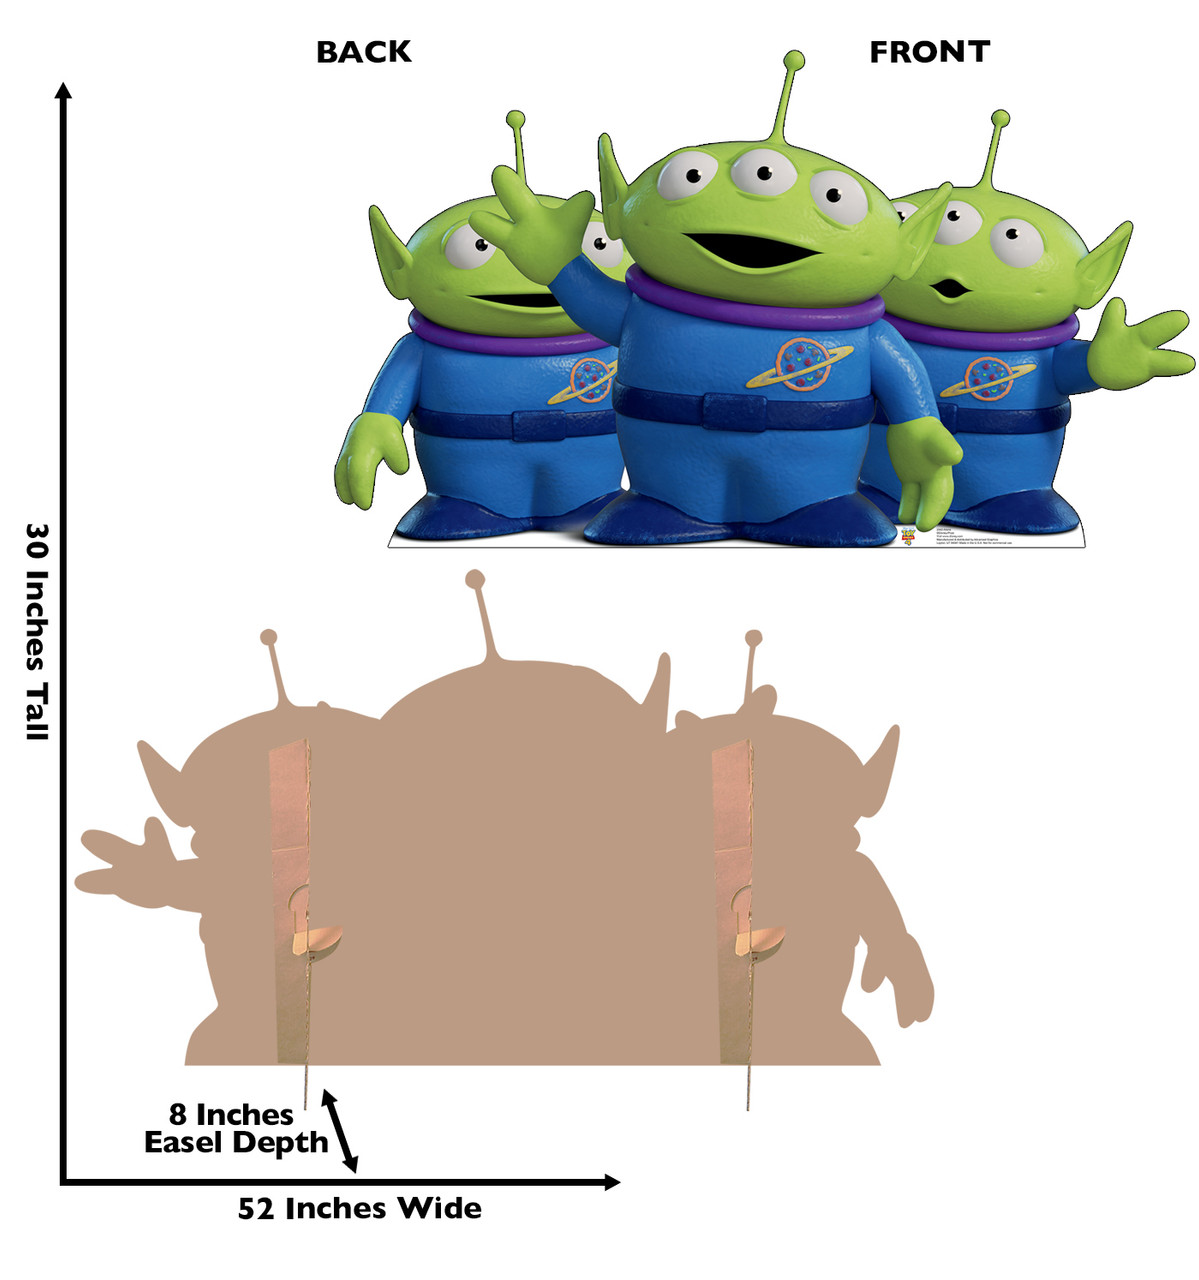 Aliens - Toy Story 4 Cardboard Cutout Front and Back View